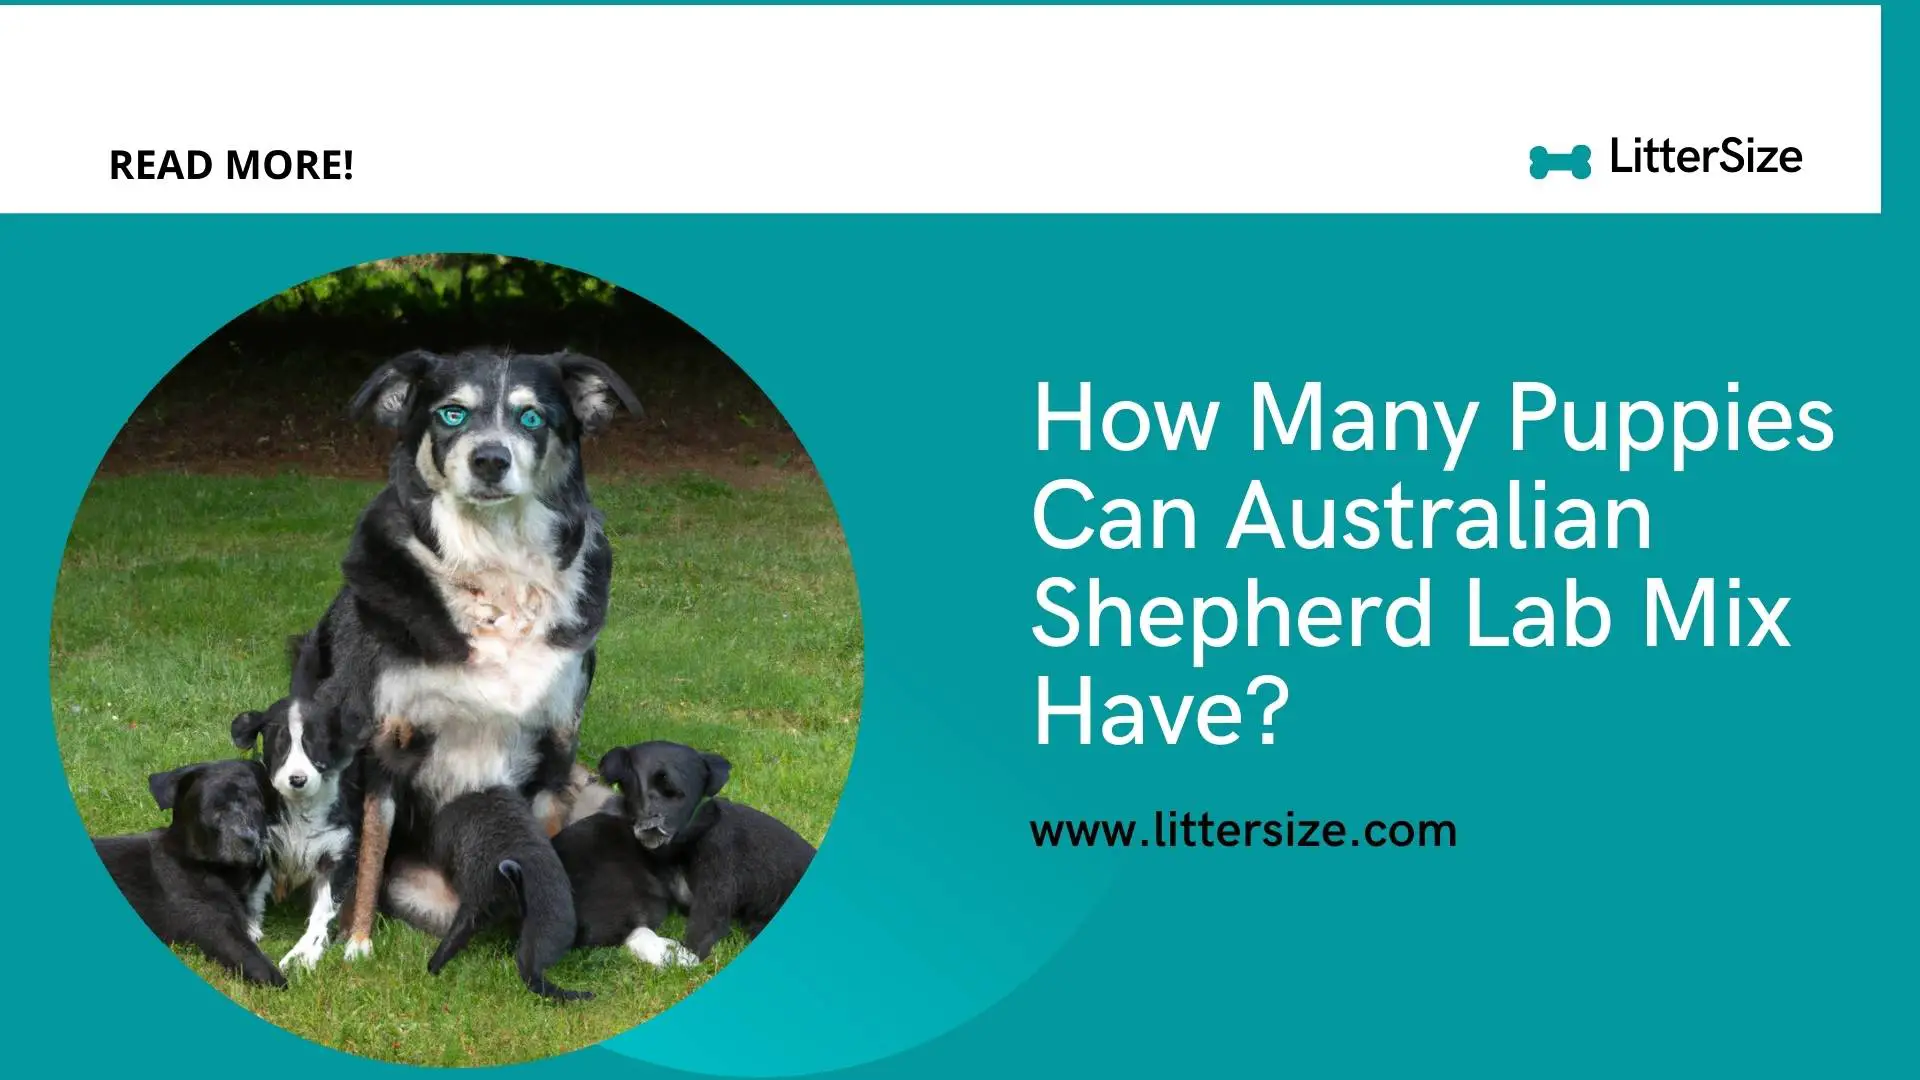 How Many Puppies Can Australian Shepherd Lab Mix Have?